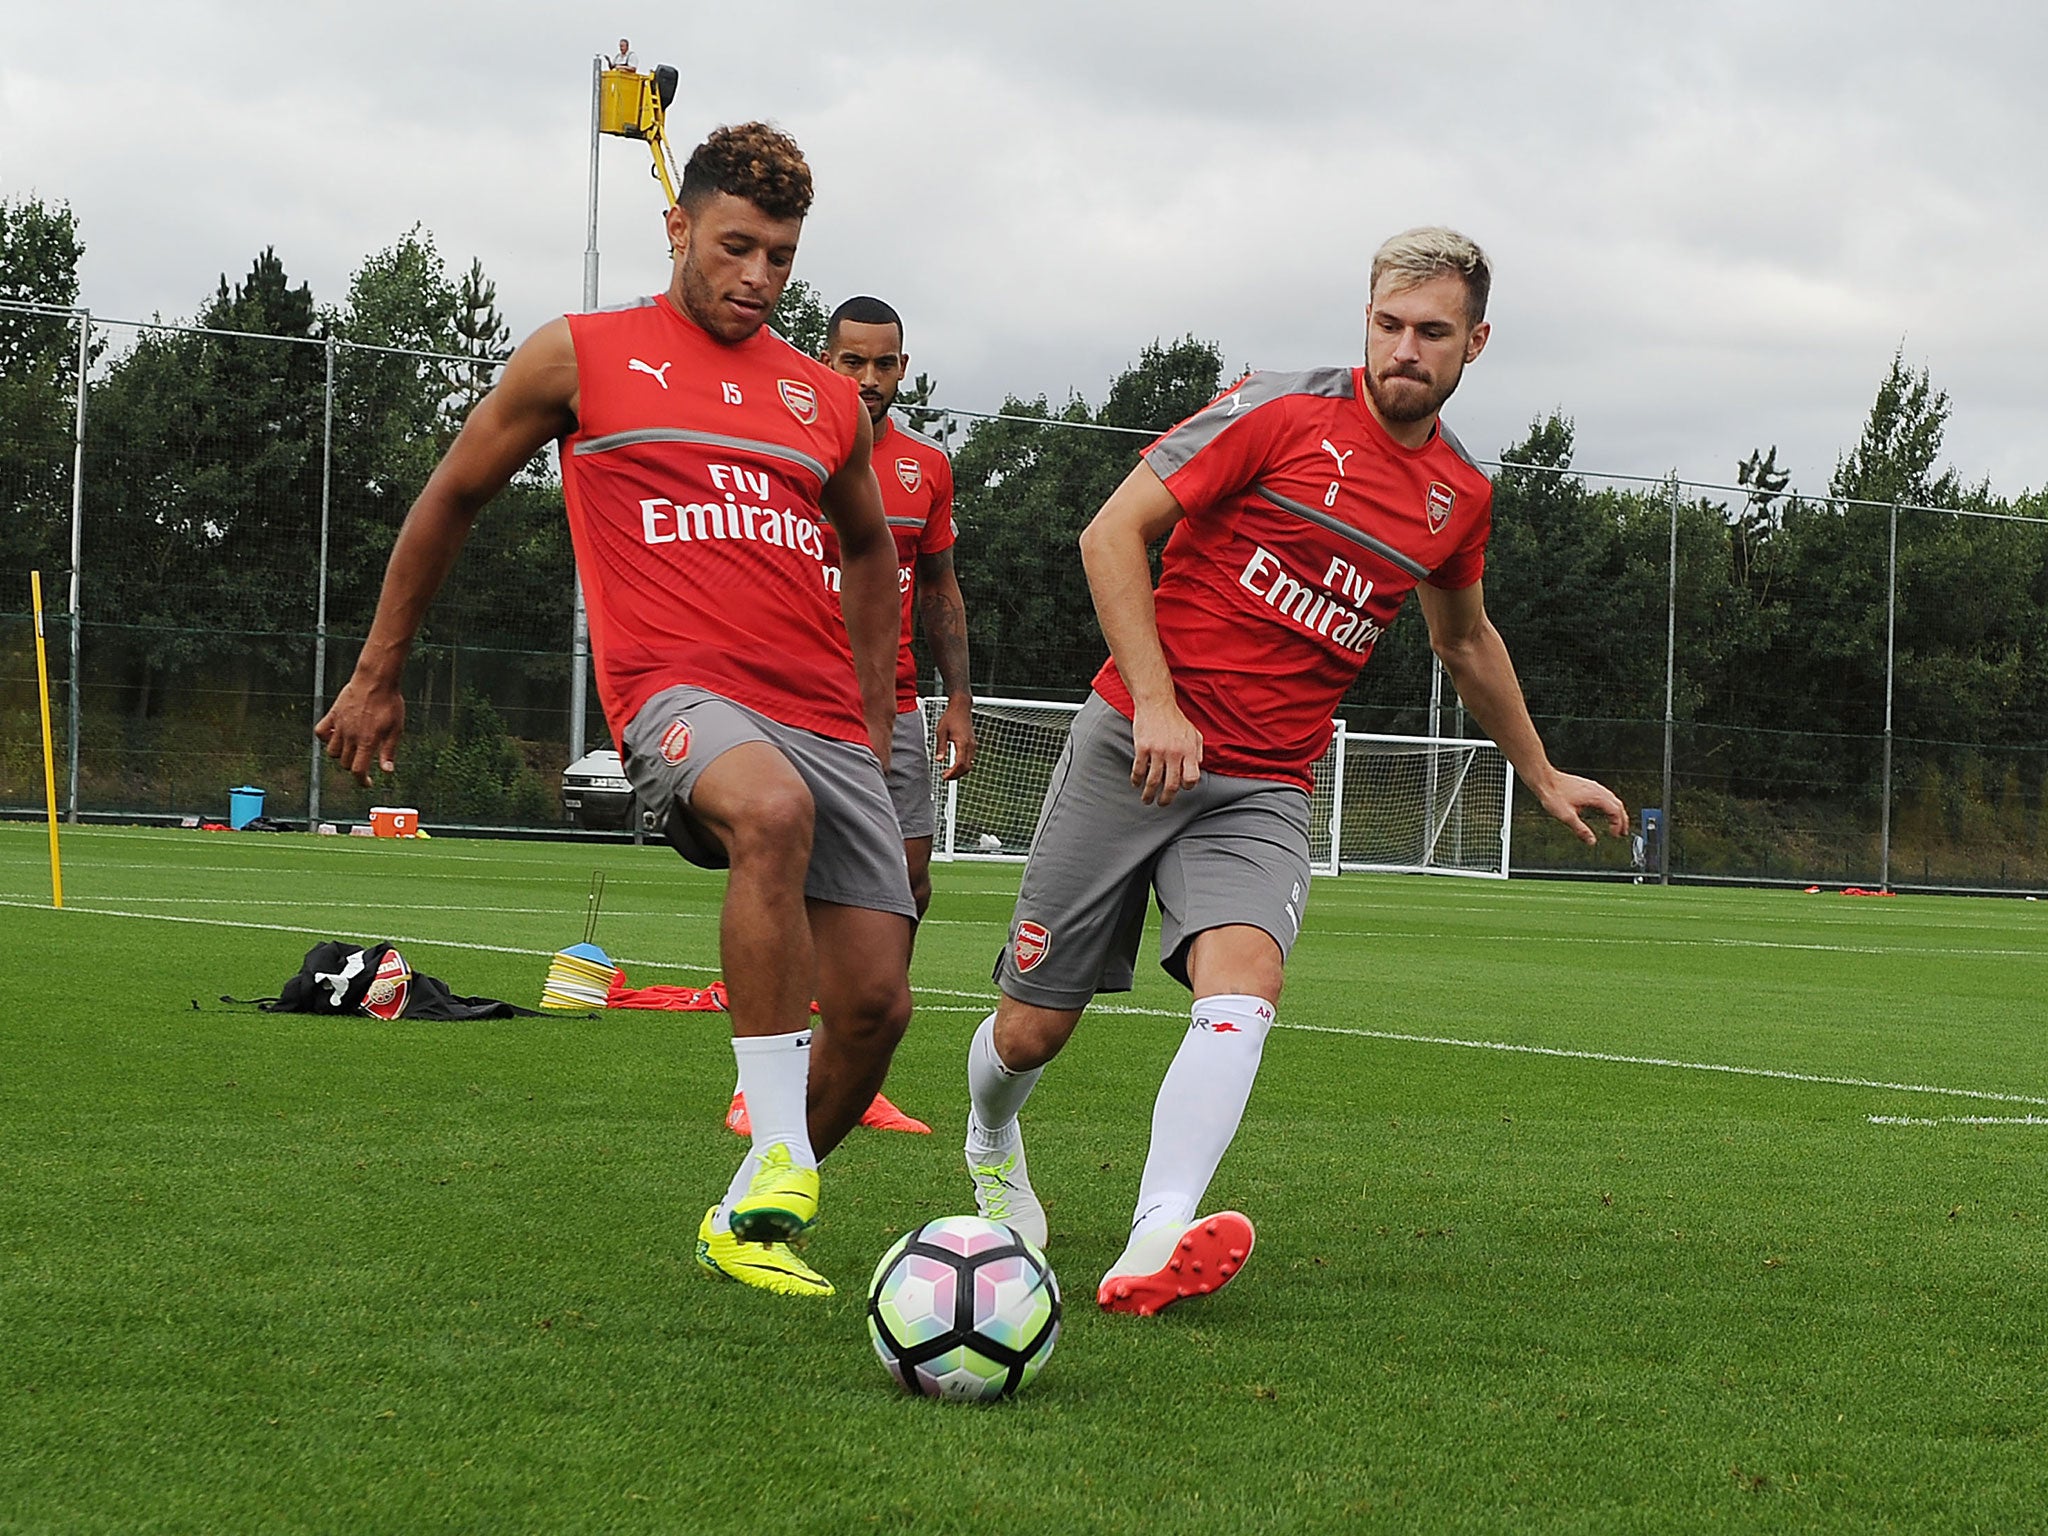 Oxlade-Chamberlain and Ramsey still have the chance to start over at Arsenal